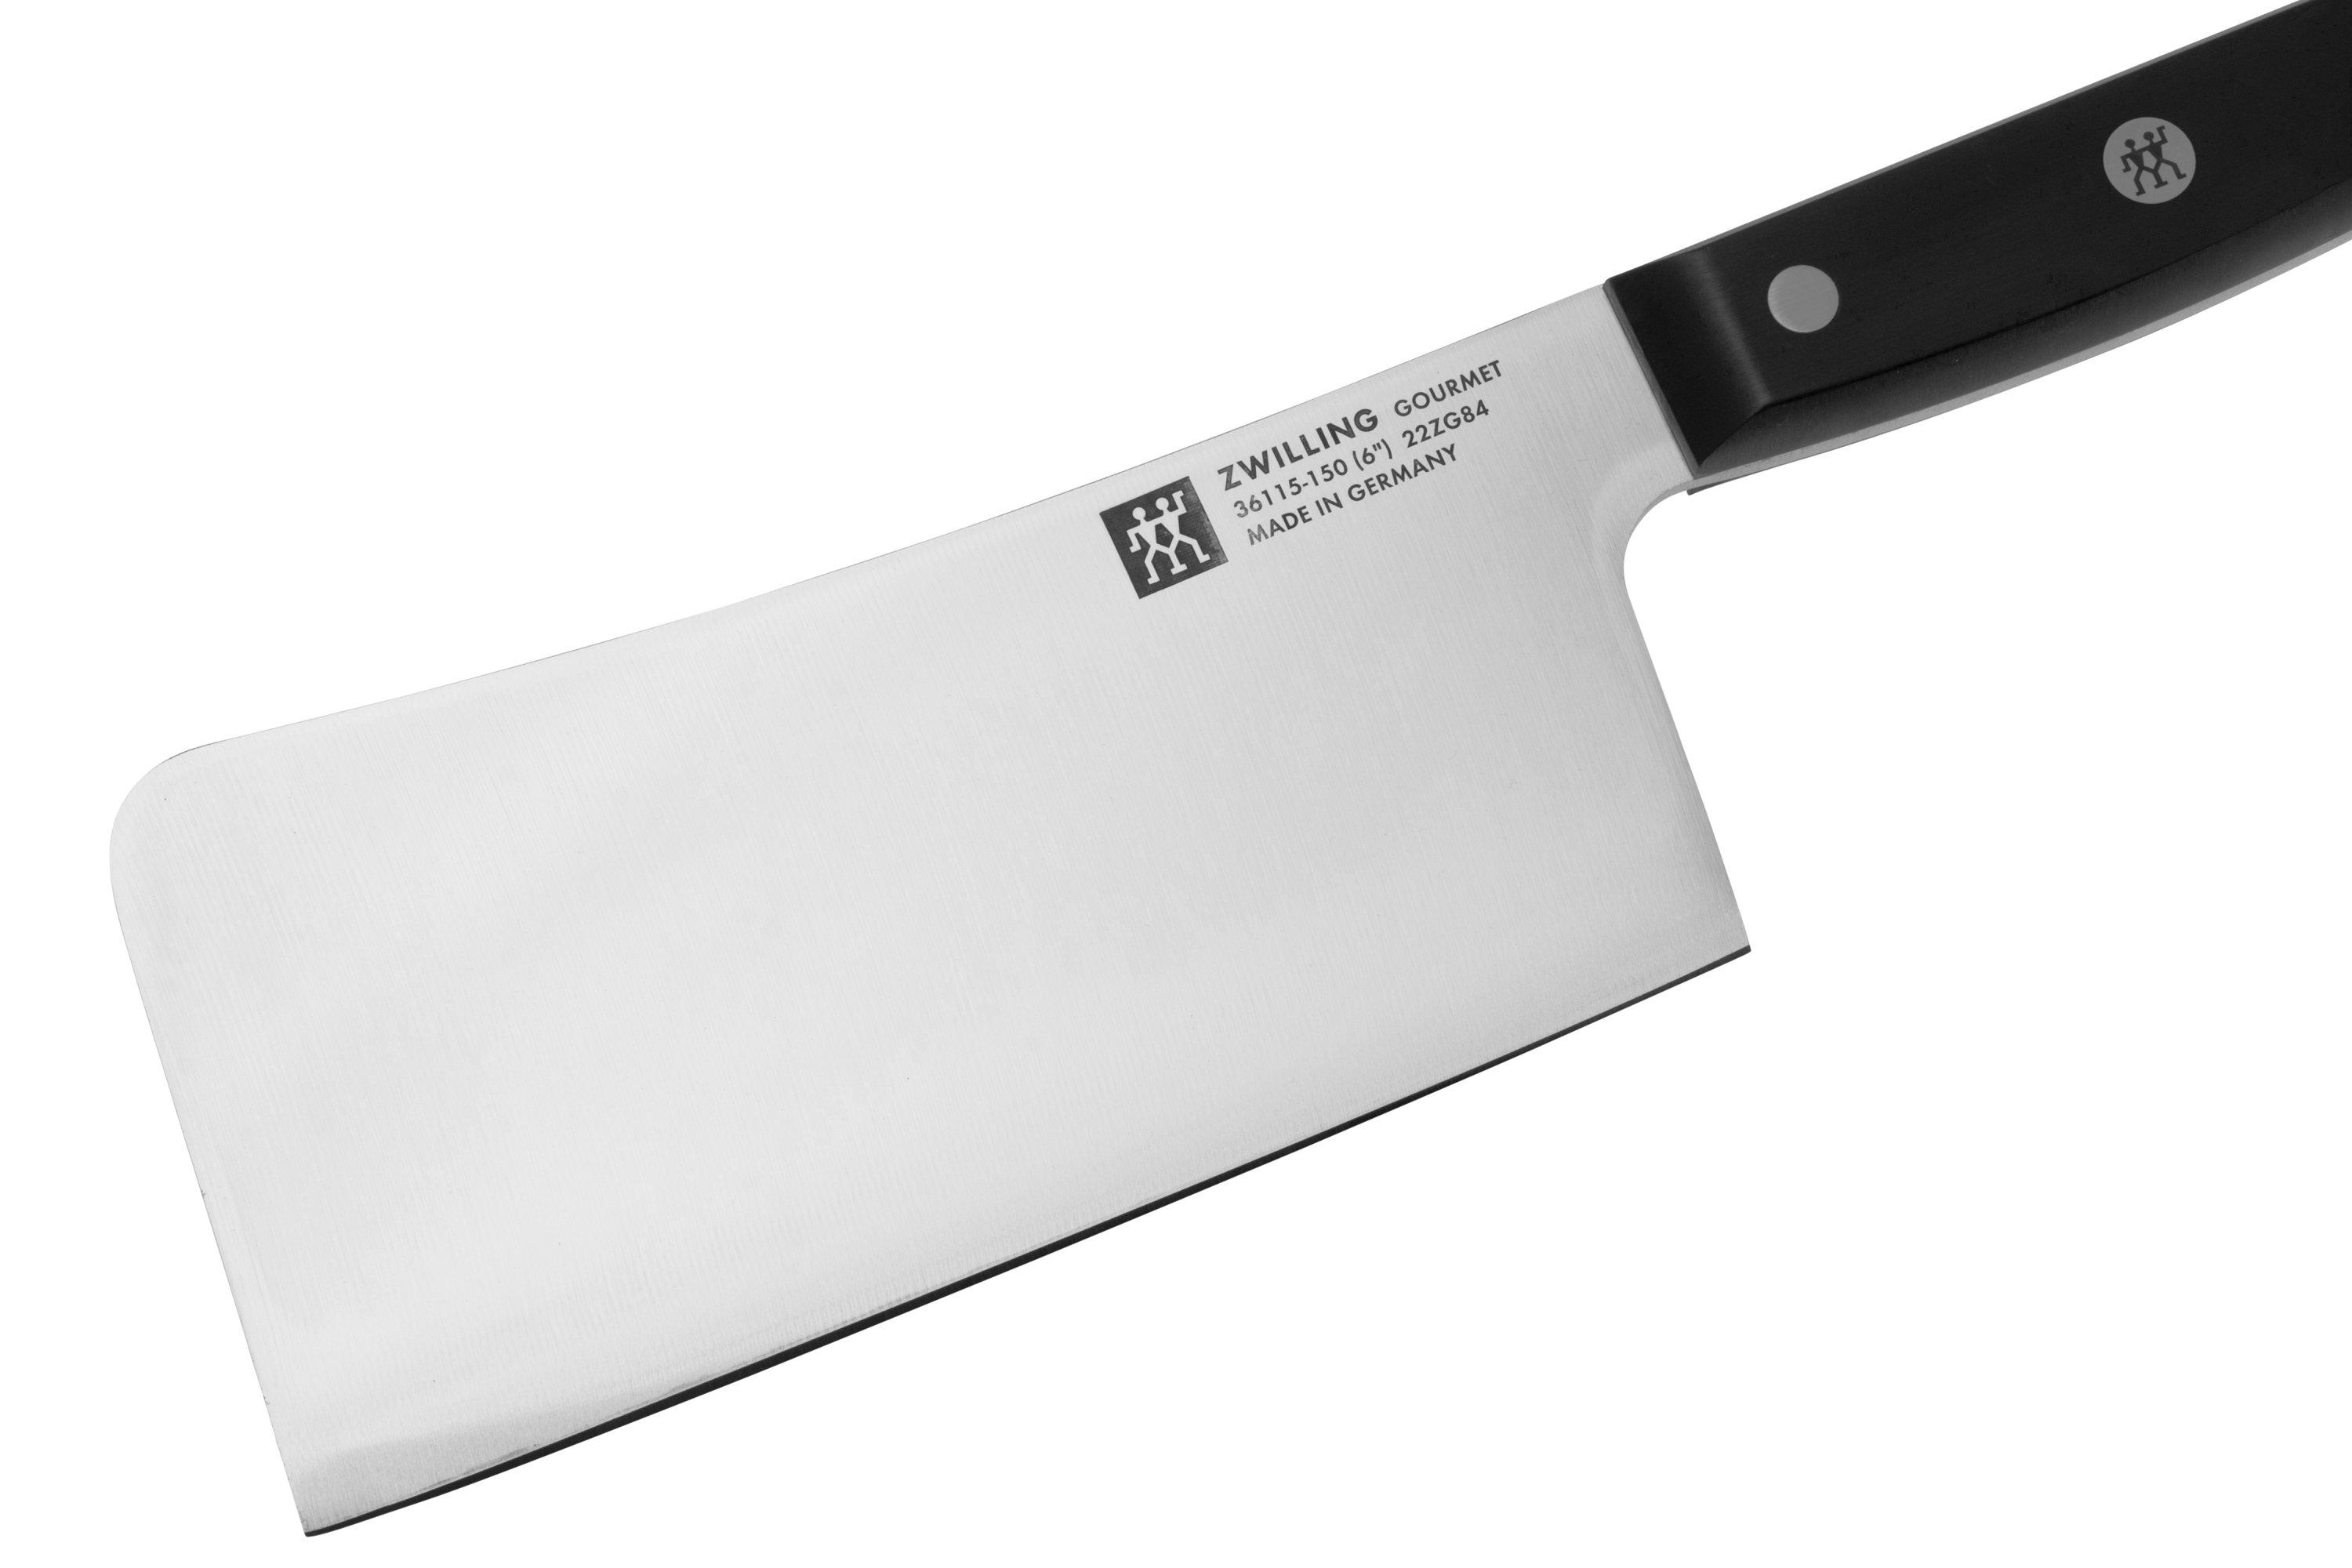 Zwilling Gourmet cleaver 15 cm, 36115-151  Advantageously shopping at